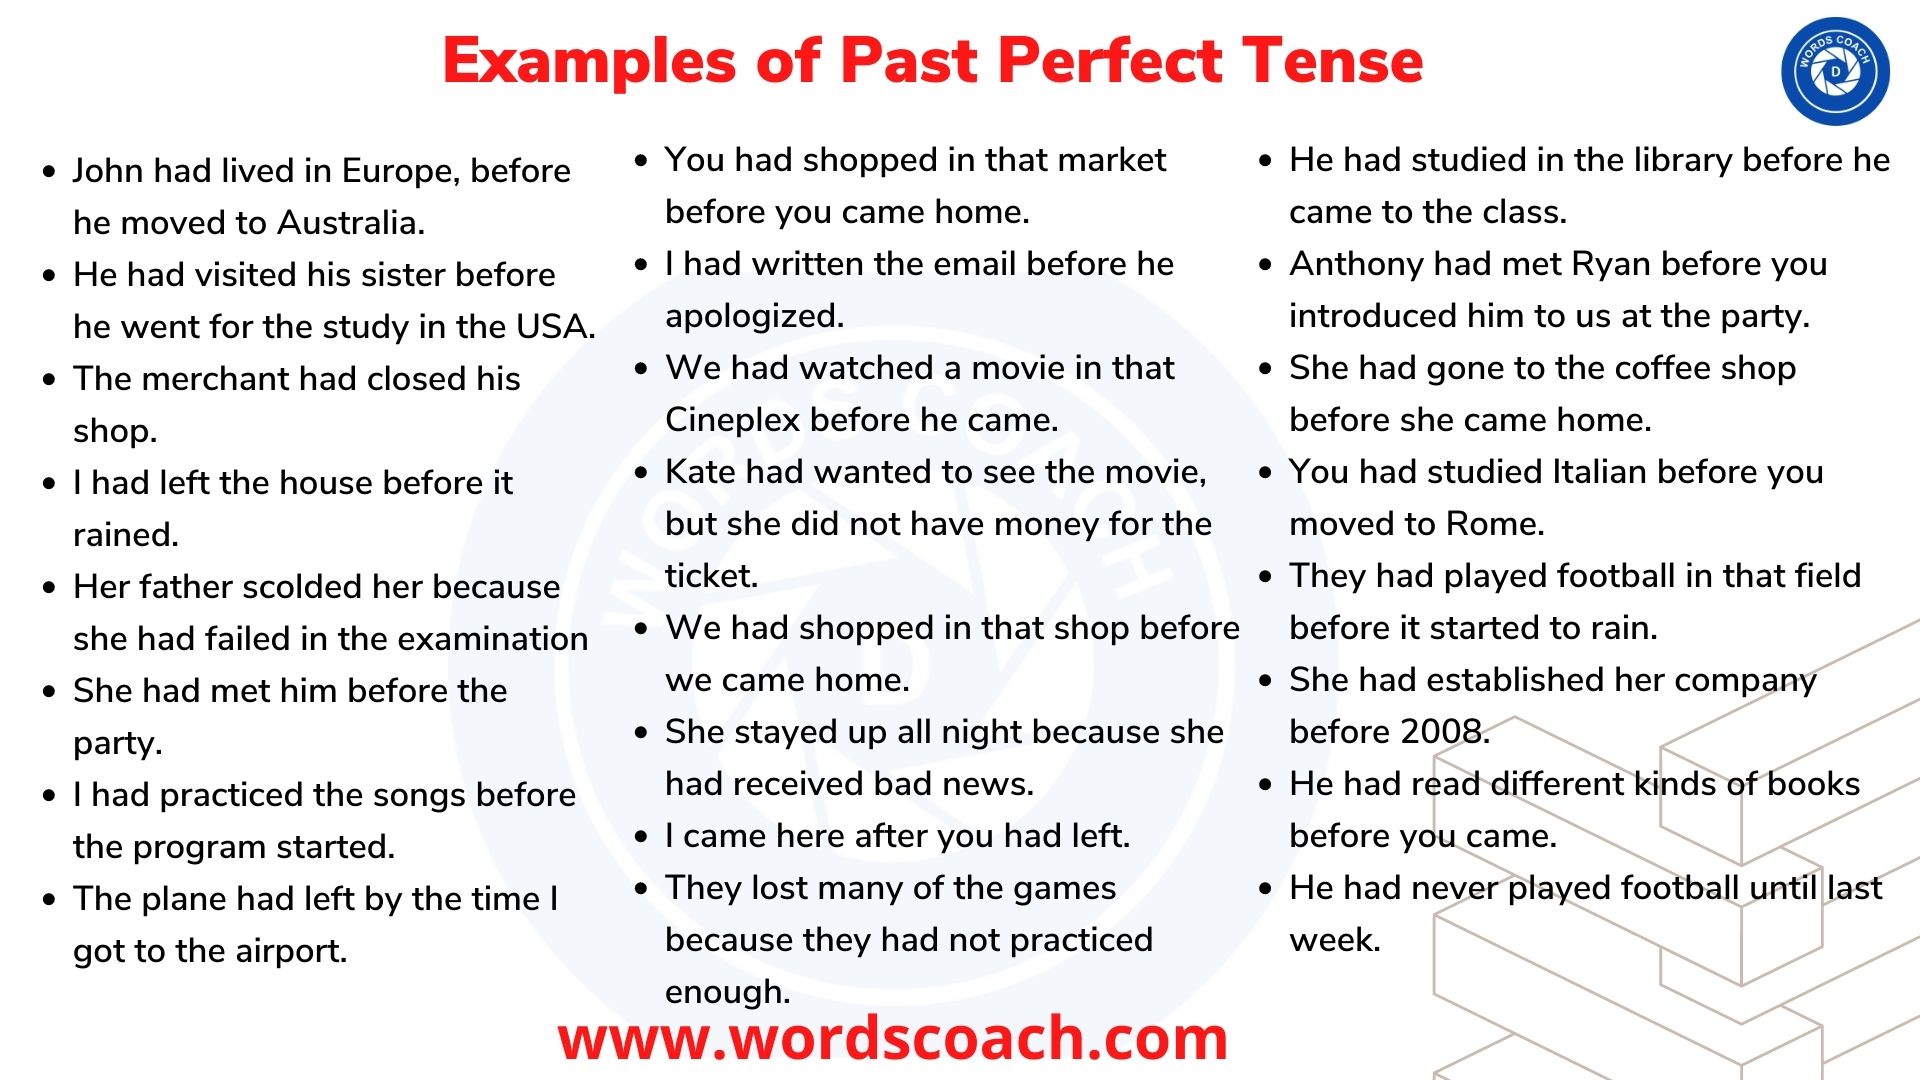 Examples of Past Perfect Tense - wordscoach.com